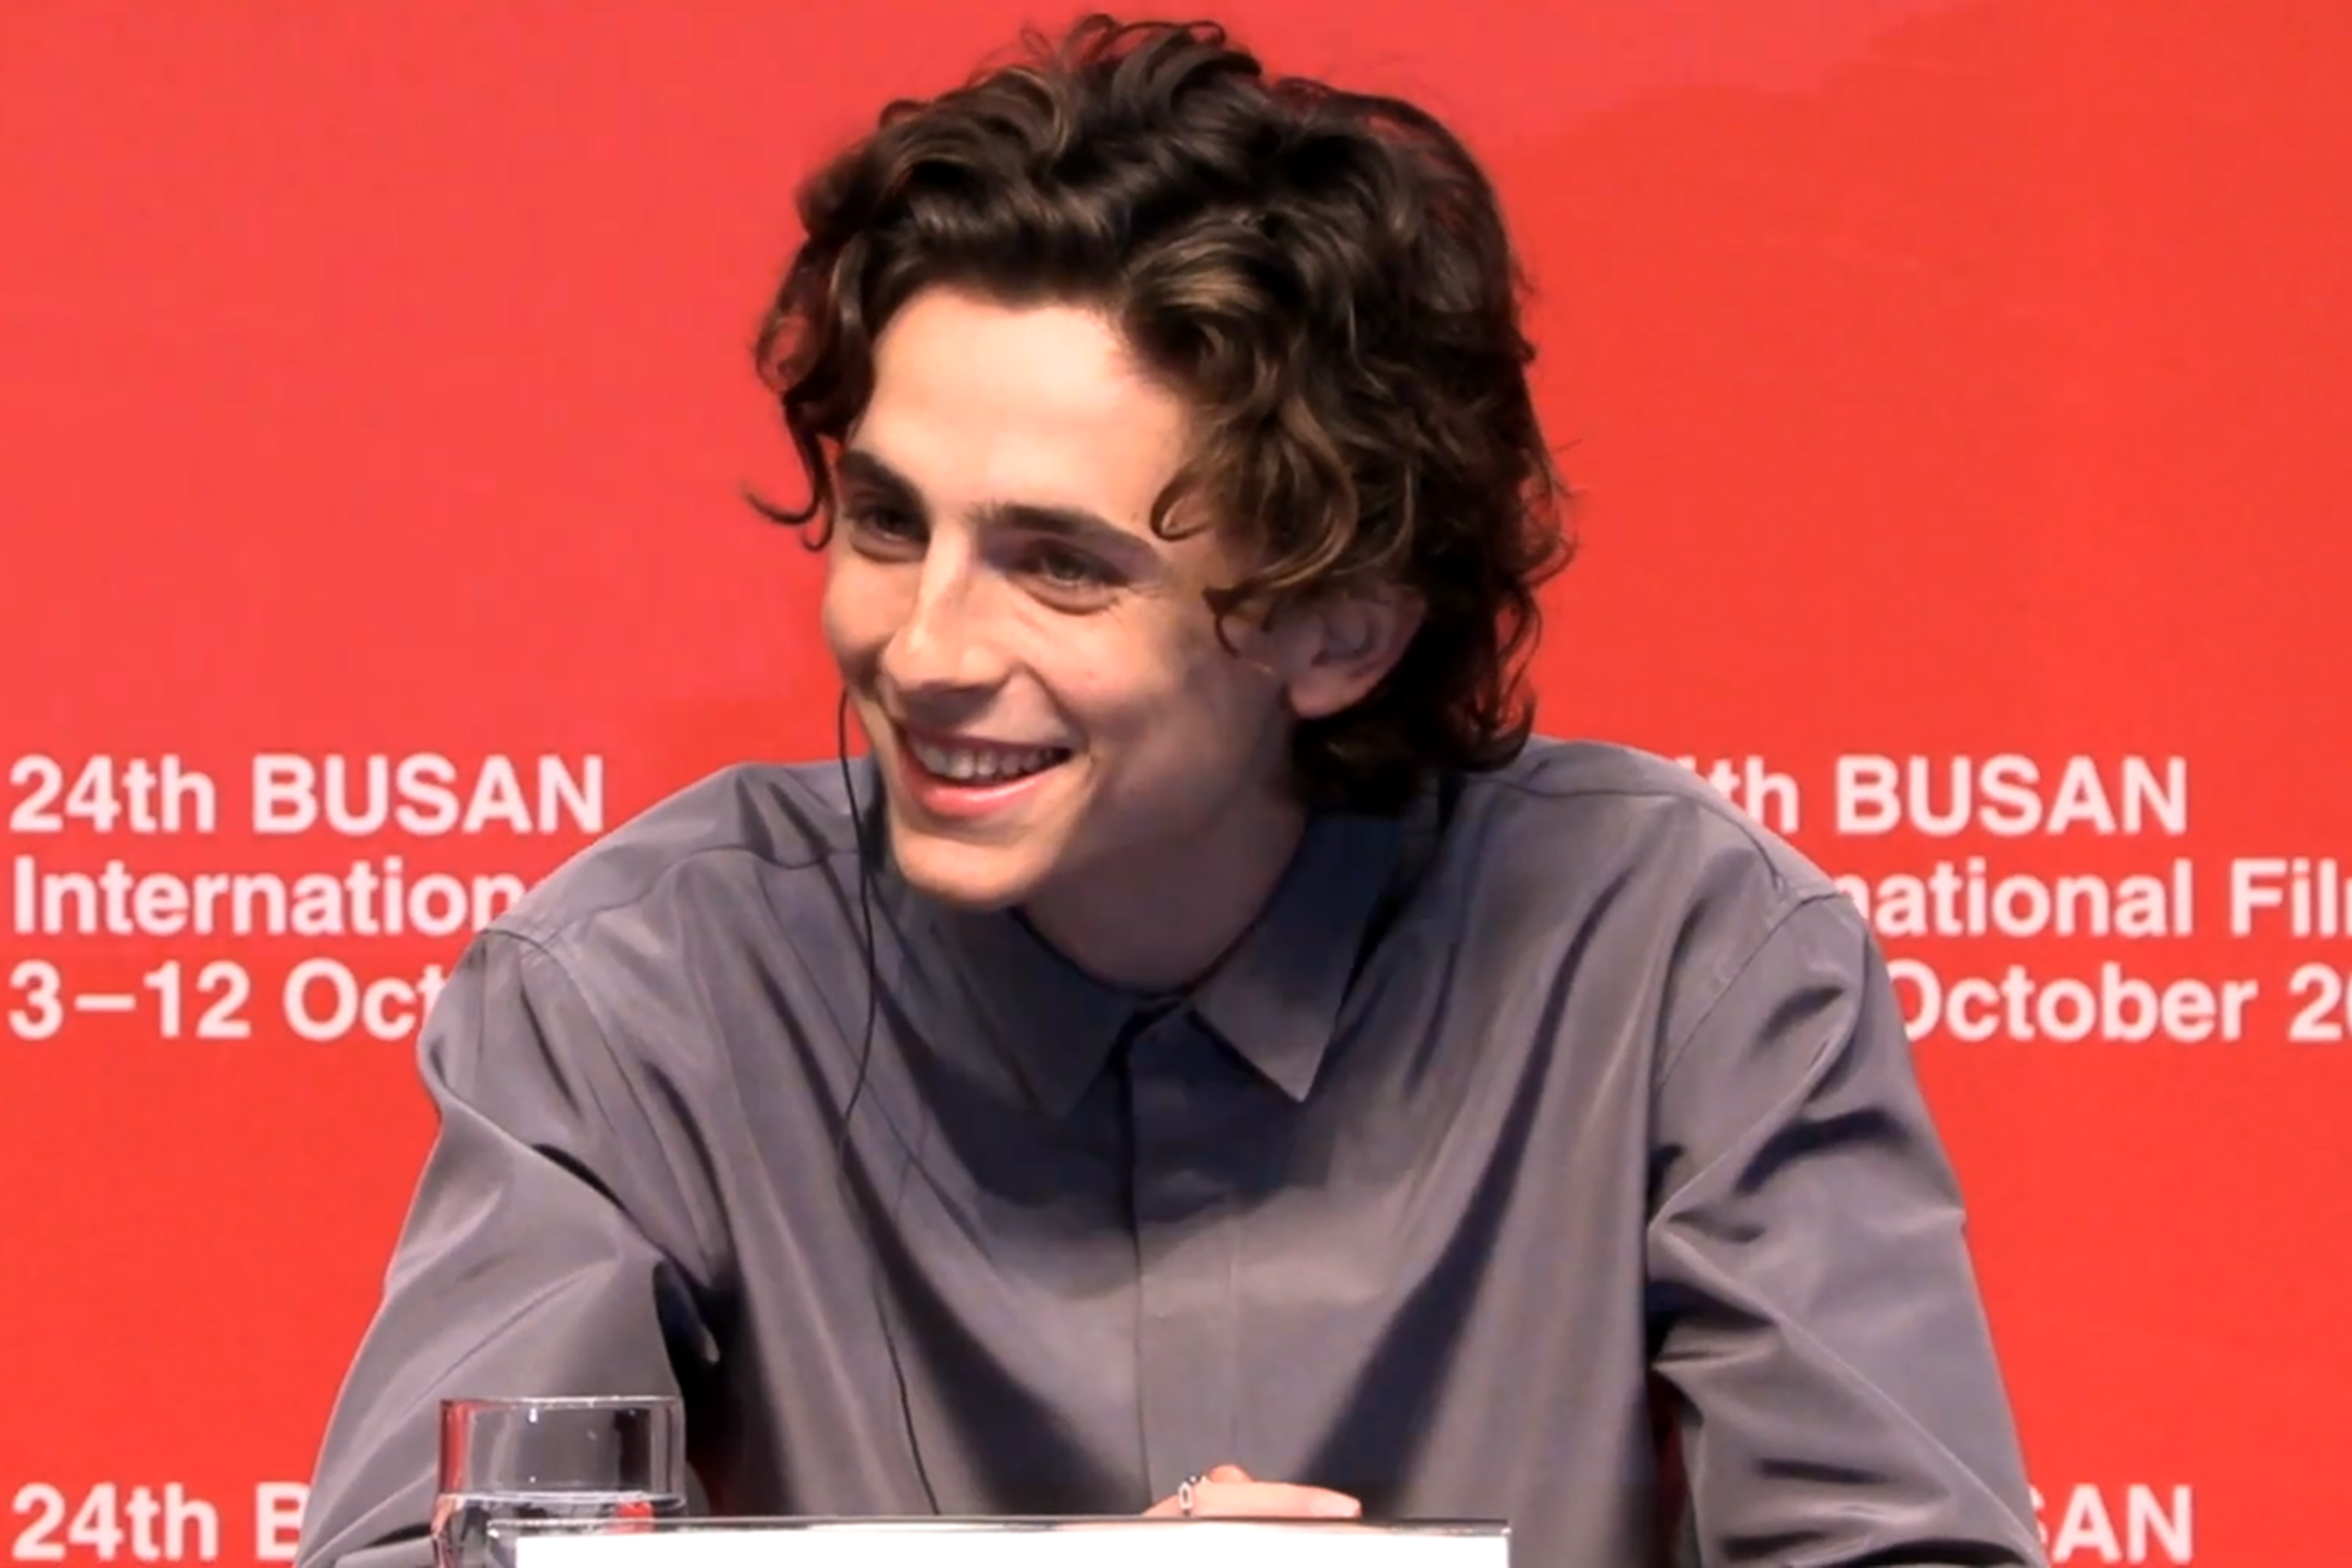 a picture of timothee chalamet smiling